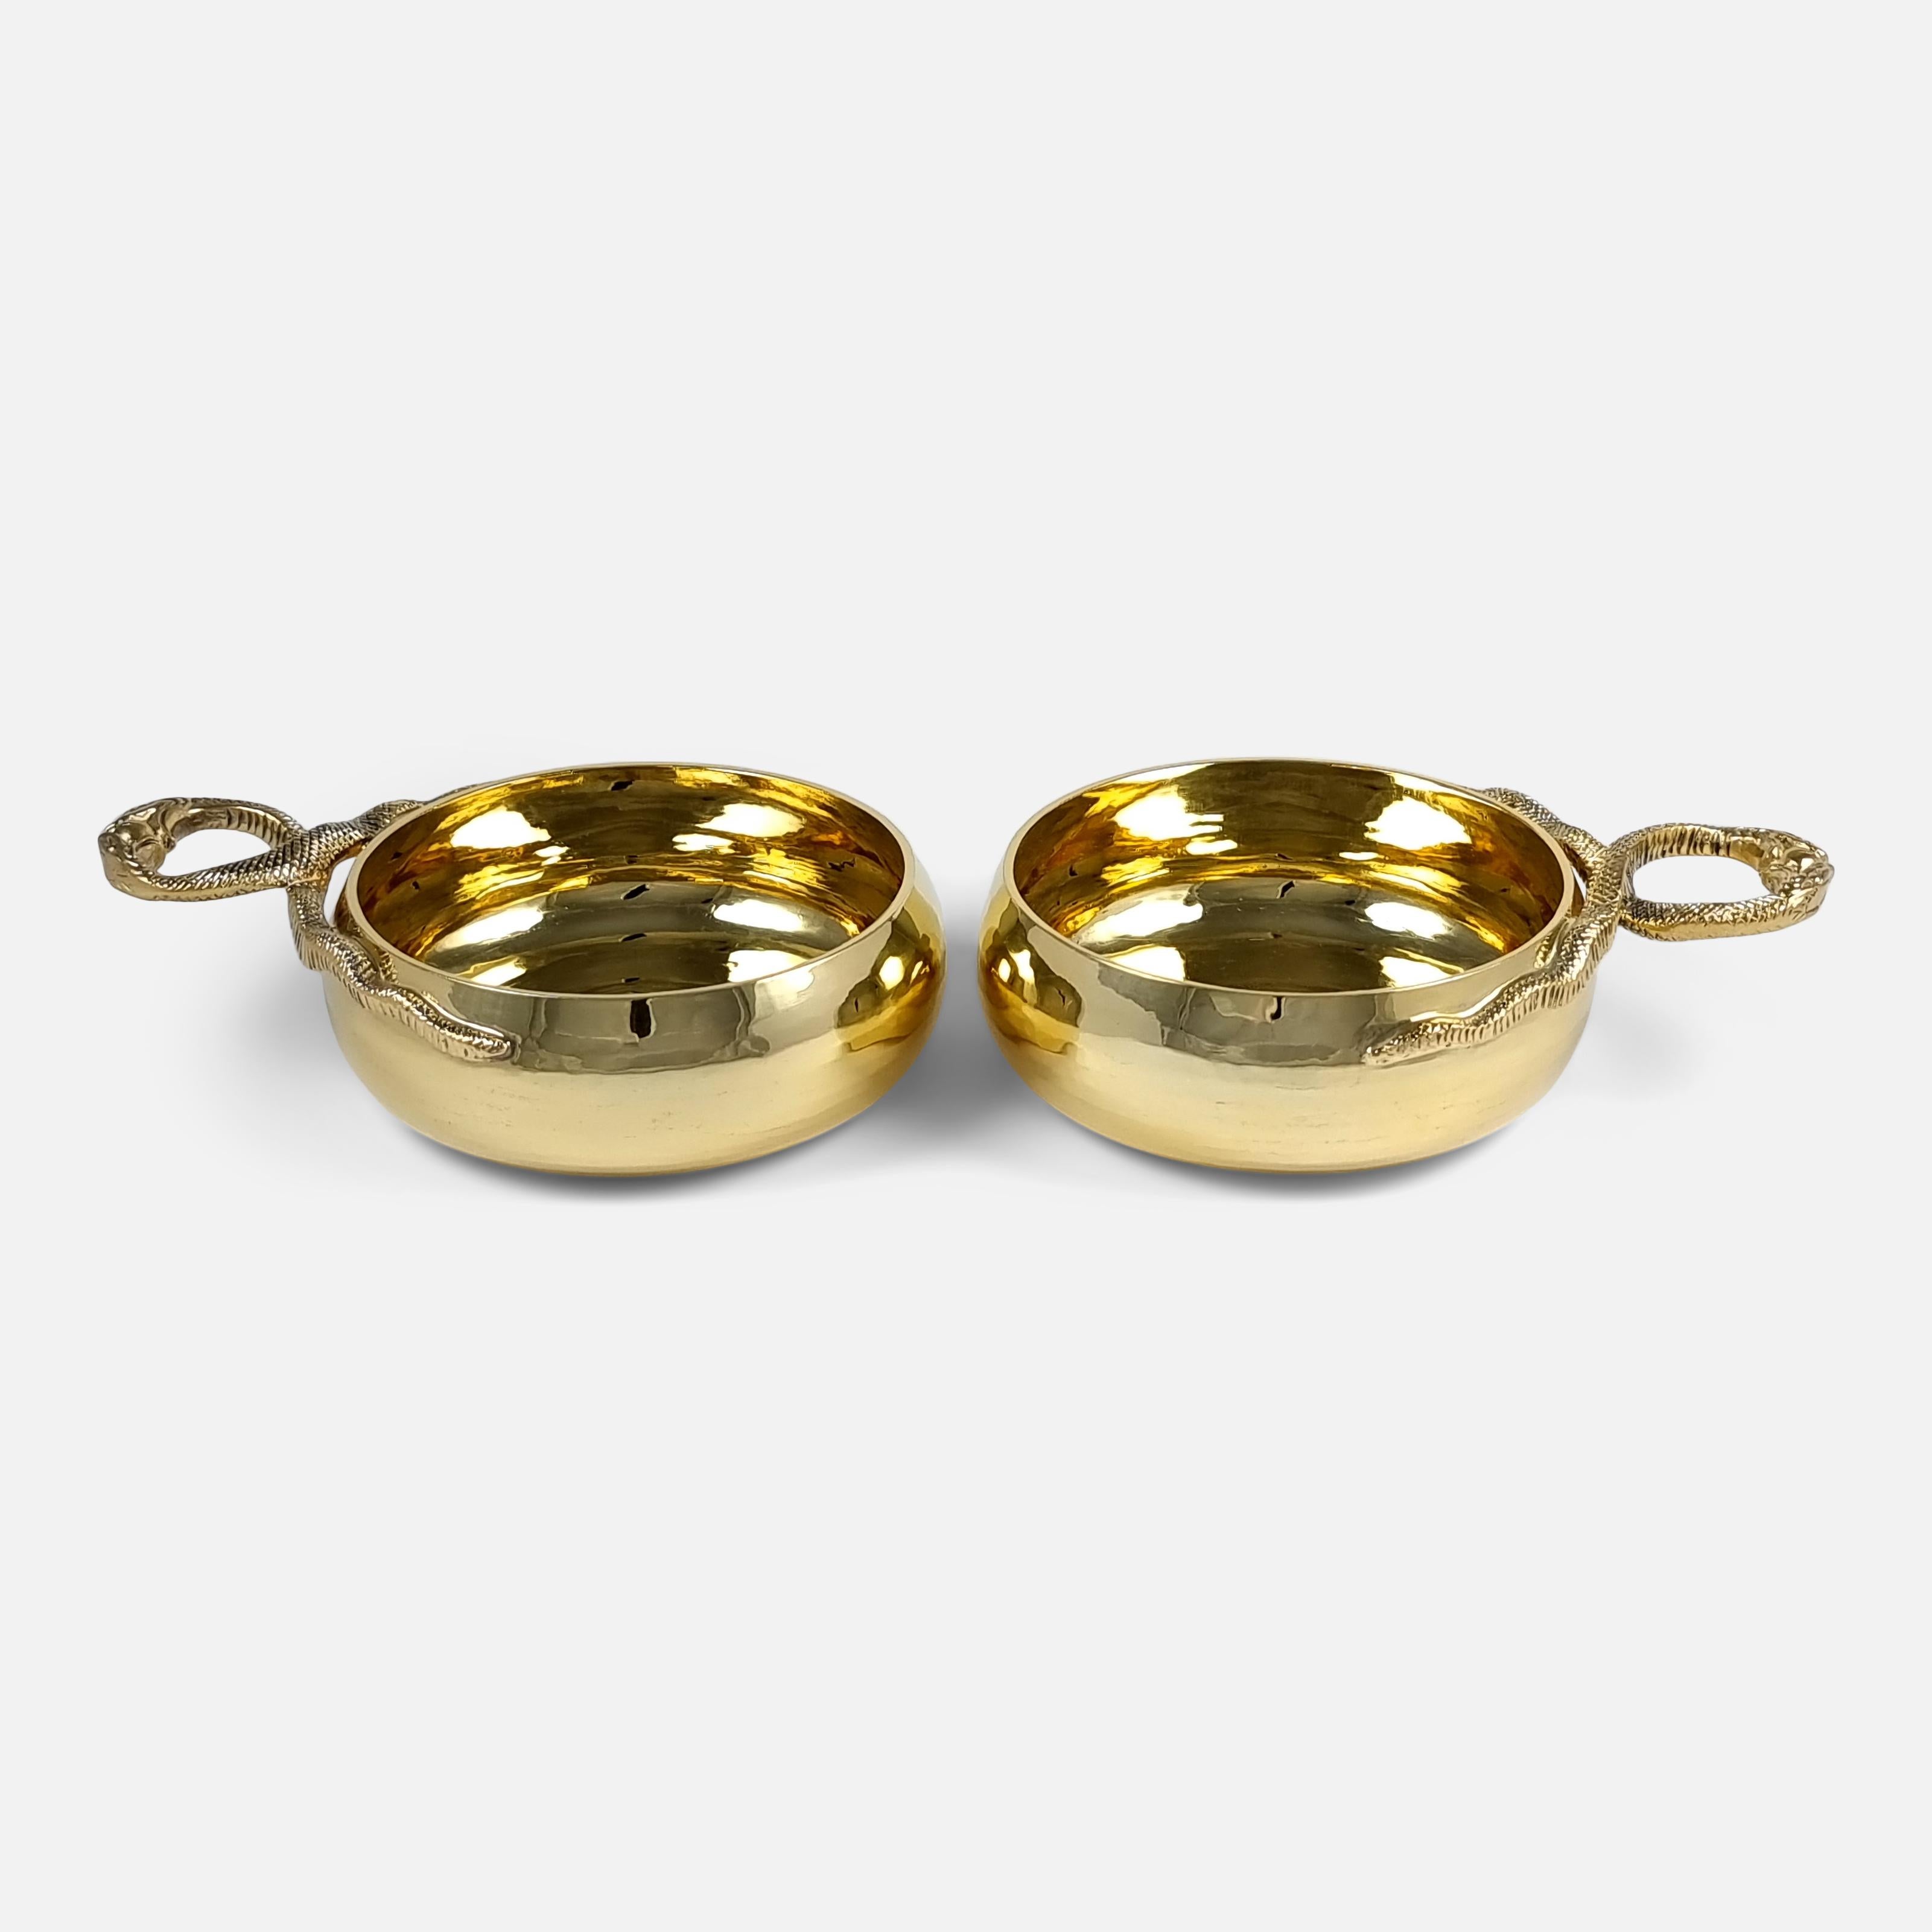 Mid-20th Century Cased Pair of Sterling Silver-Gilt Wine Tasters, 1934